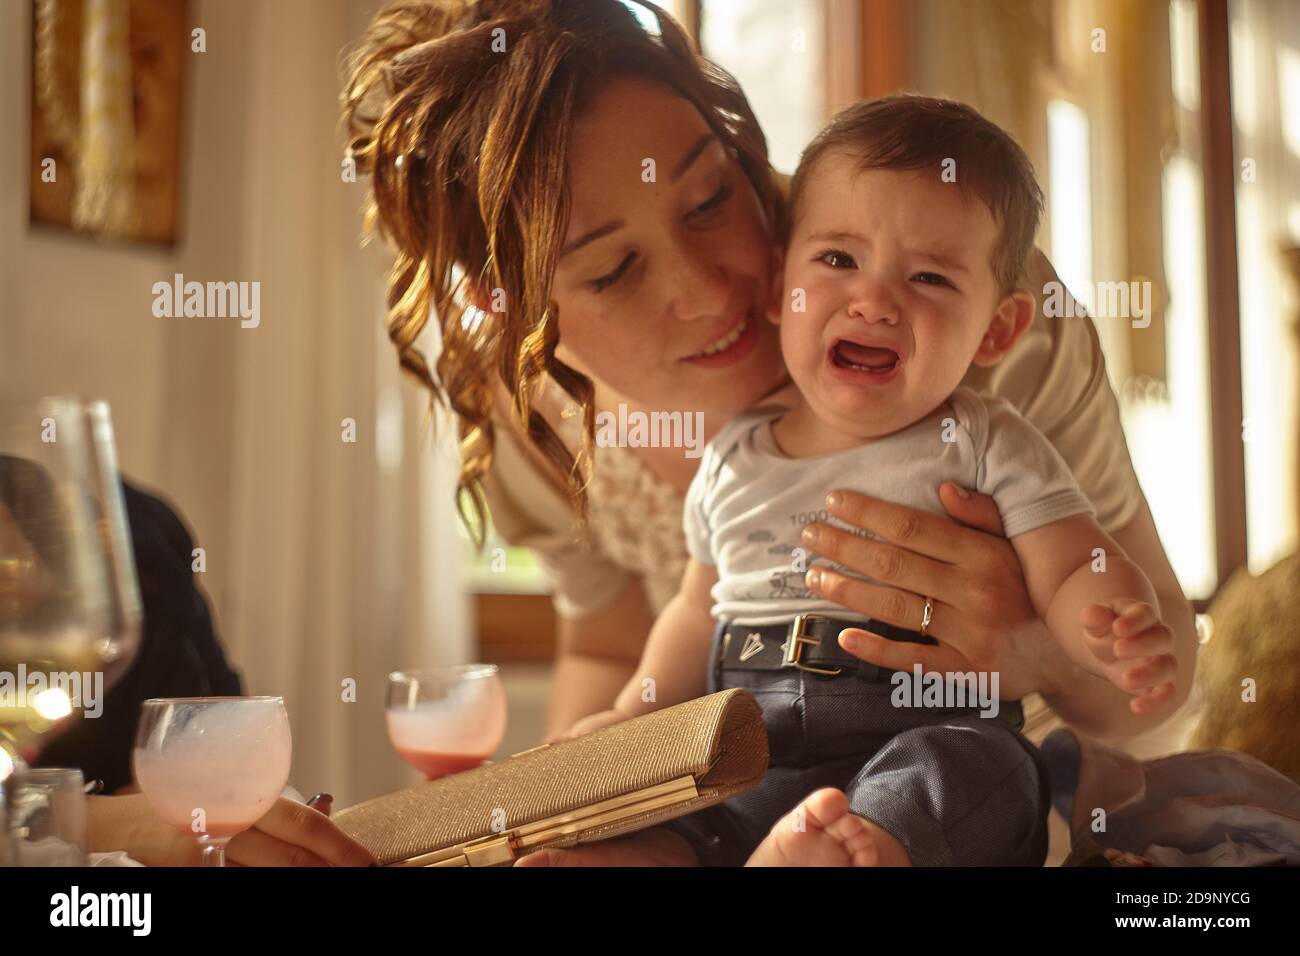 Young mom tries to reassure her crying baby. Stock Photo